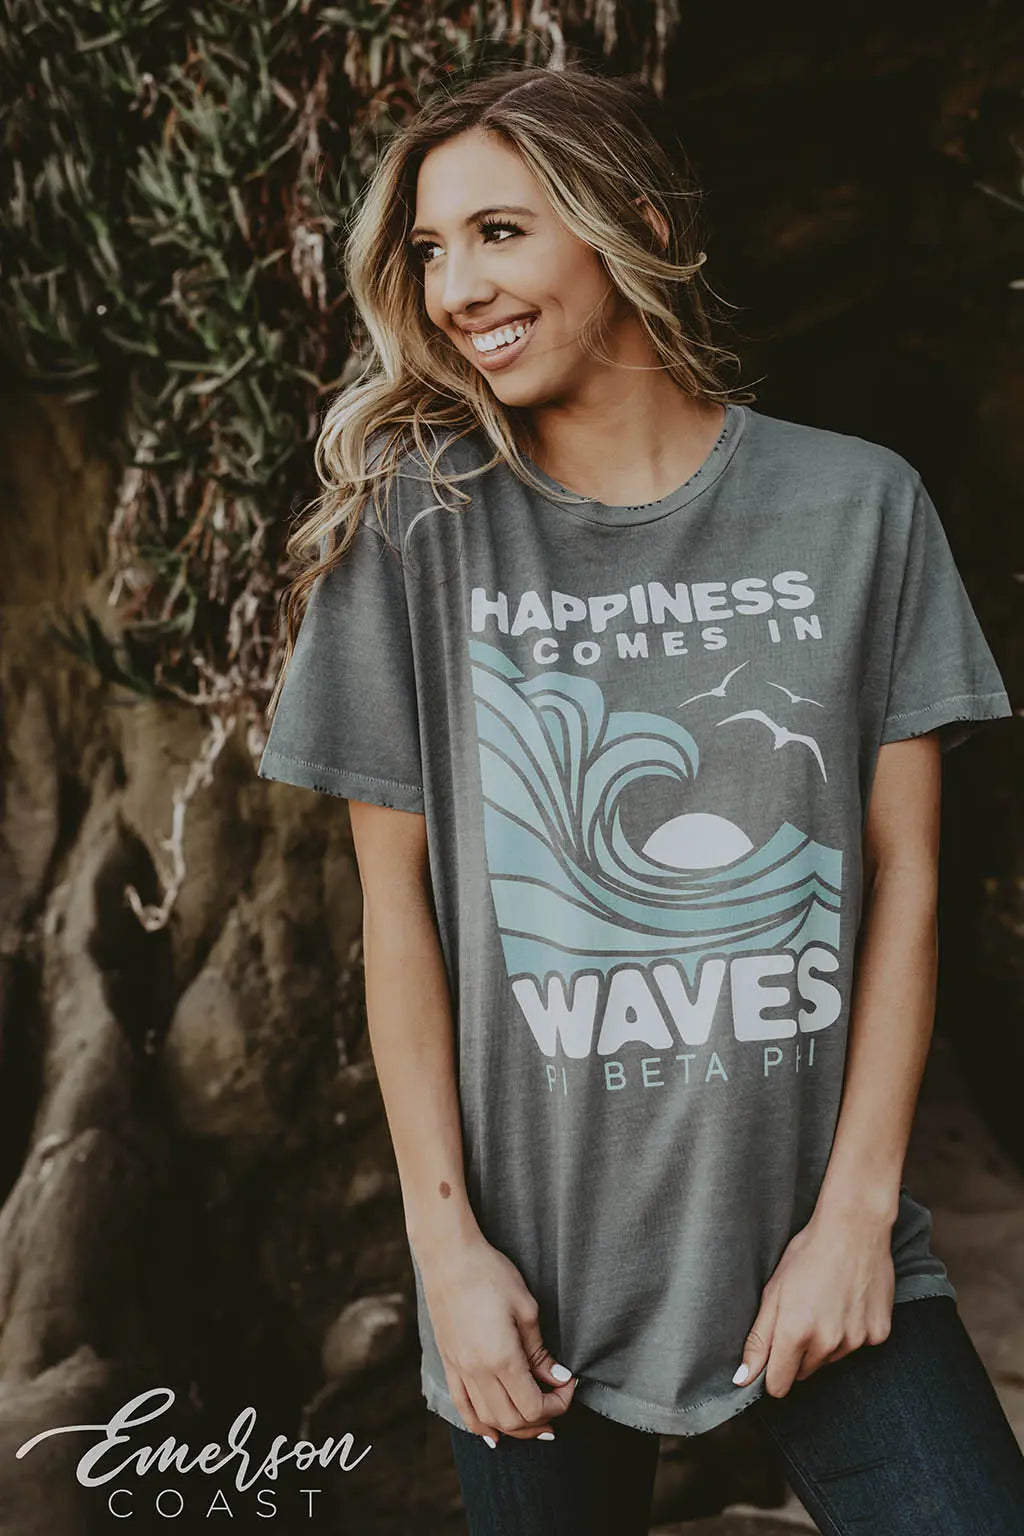 Pi Beta Phi Happiness Comes in Waves Distressed Tee